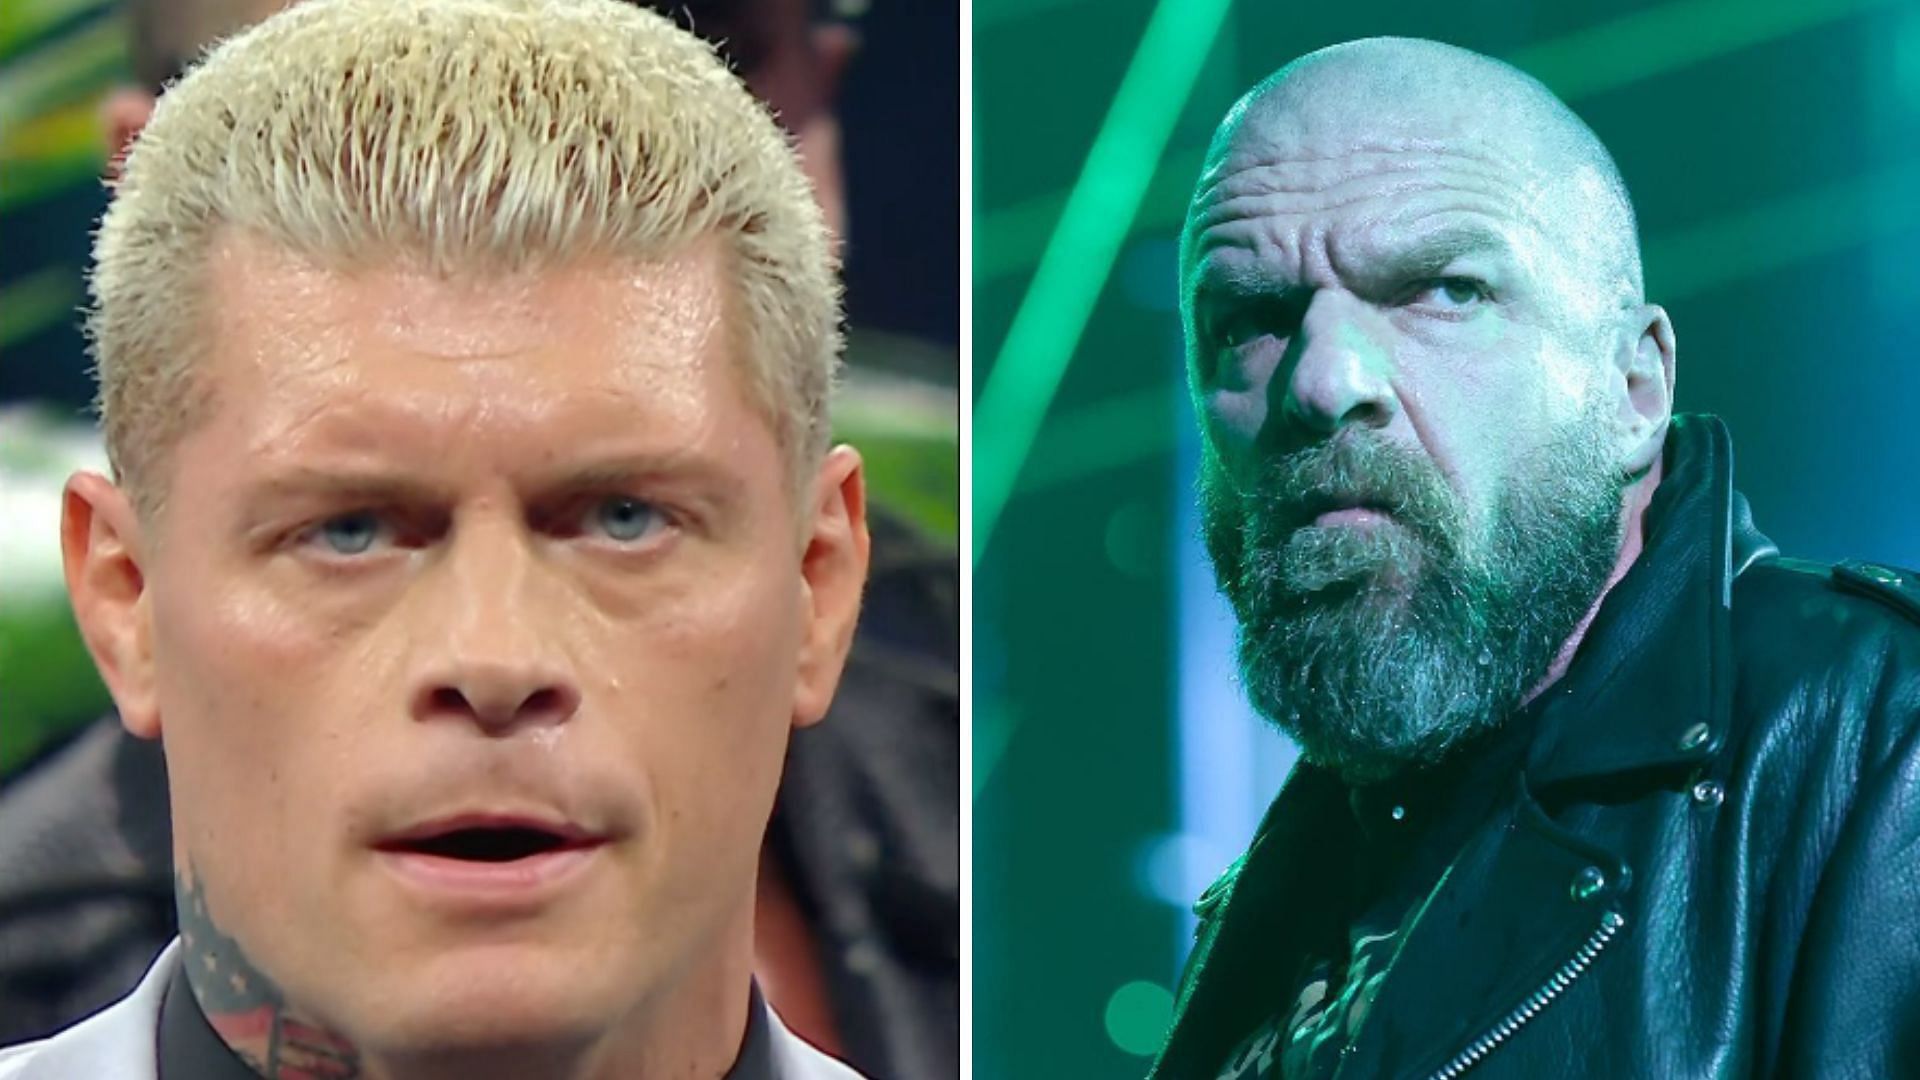 Cody Rhodes on the left and Triple H on the right [Image credits: stars